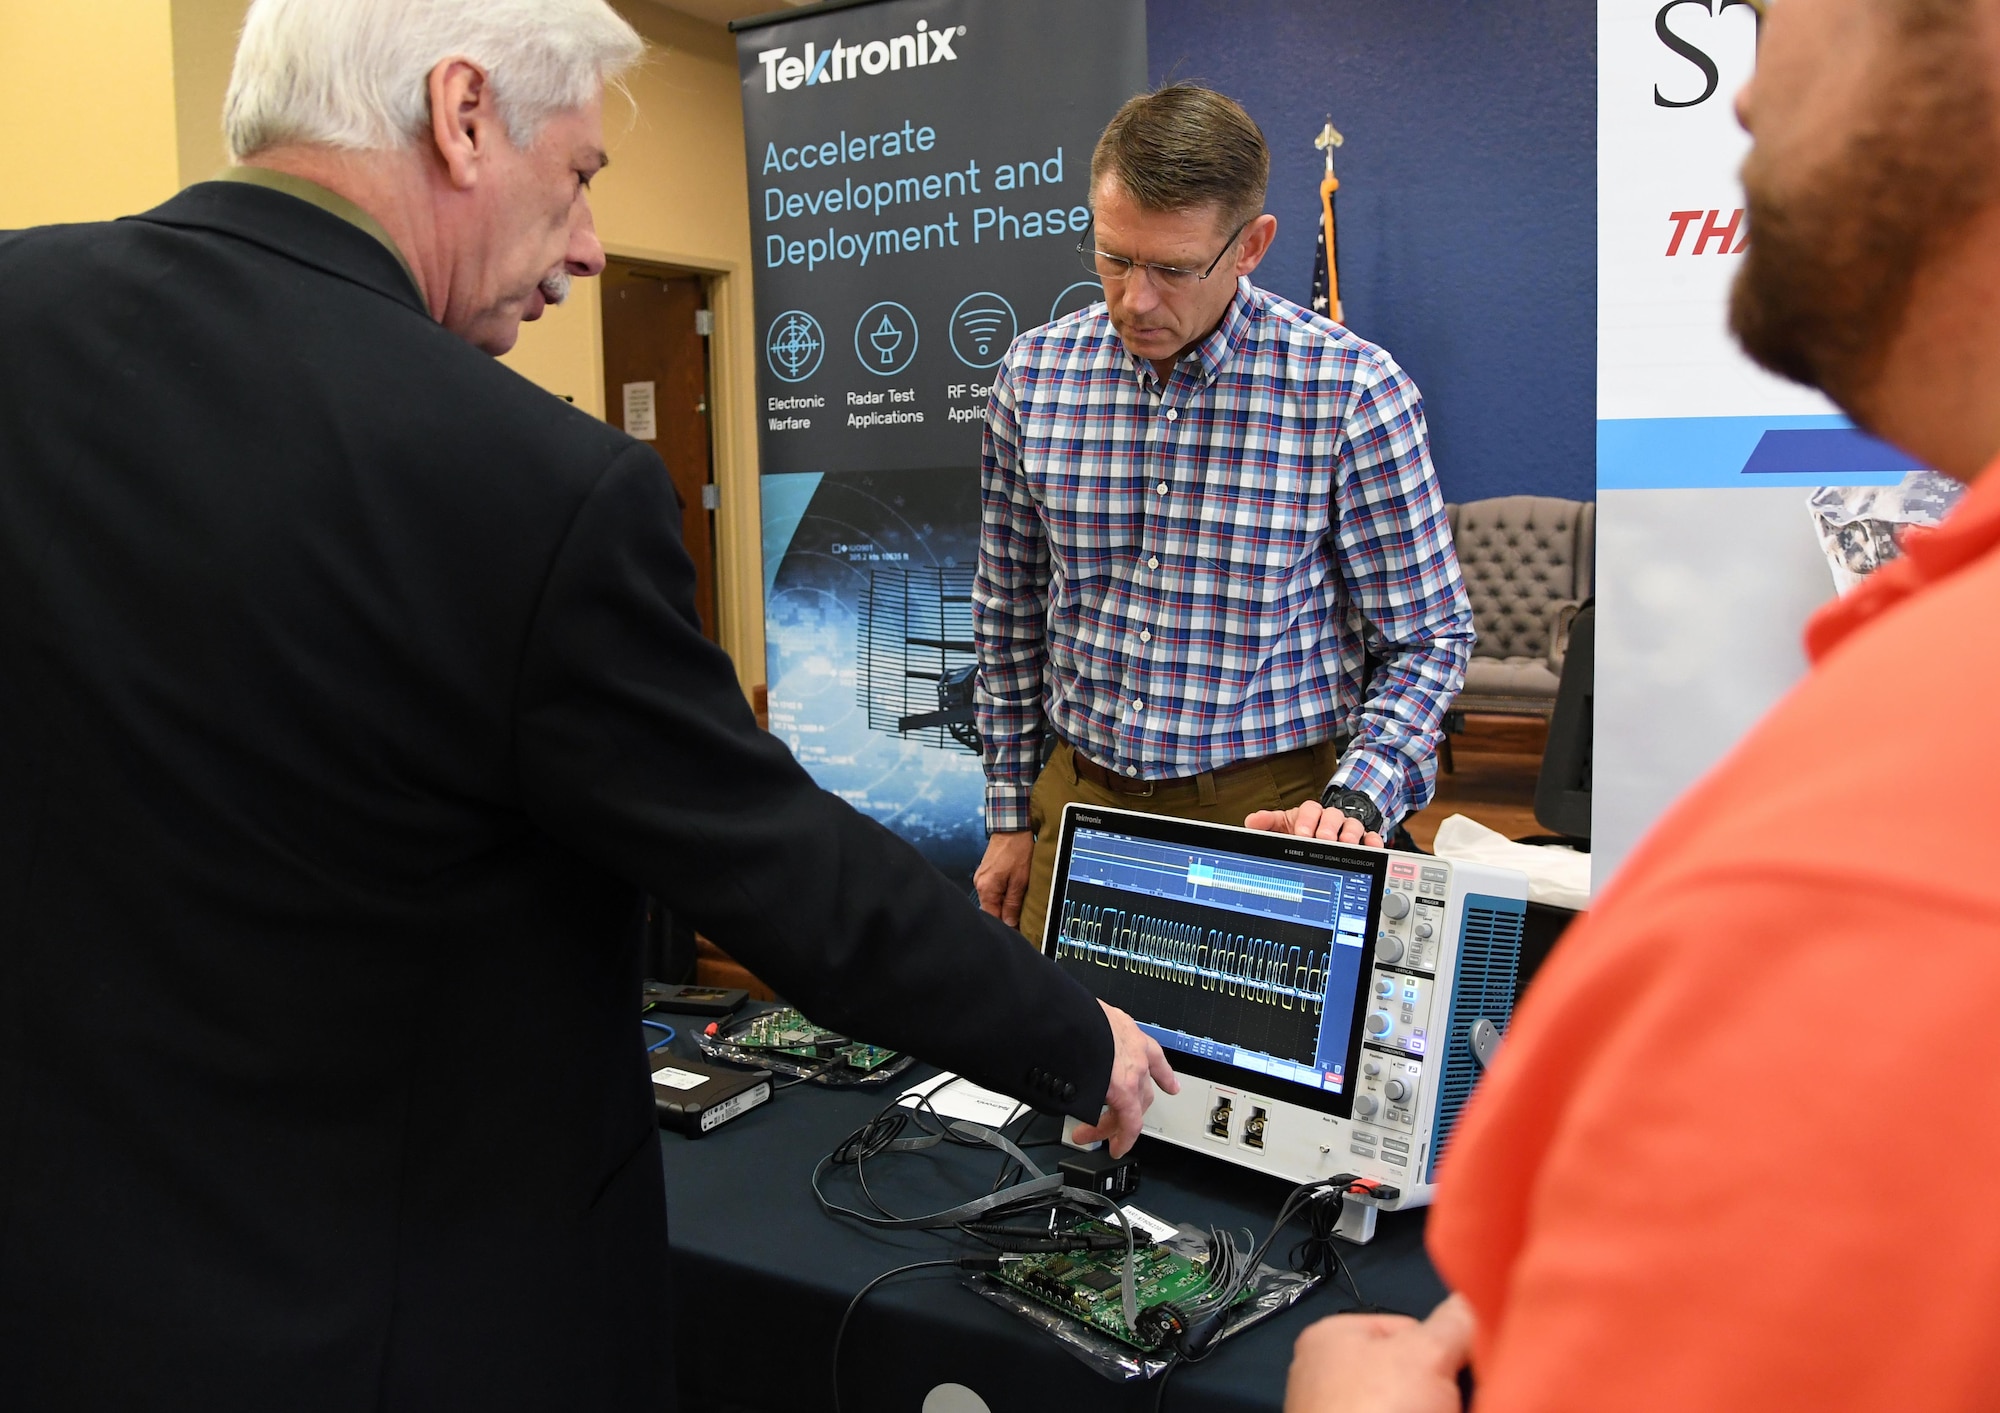 Randal Blanchard, 85th Engineering Installation Squadron electronics engineer, asks Larry Shemetulskis, Tektronix southeast U.S. channel manager, questions about the operations of an oscilloscope, which is used for analyzing electromagnetic signals, during the Annual Keesler Air Force Base Tech Expo inside the Bay Breeze Event Center at Keesler Air Force Base, Mississippi, Feb. 11, 2020. The expo, hosted by the 81st Communications Squadron, was held to introduce military members to the latest in technological advancements to bolster the Air Force�s capabilities in national defense. (U.S. Air Force photo by Kemberly Groue)